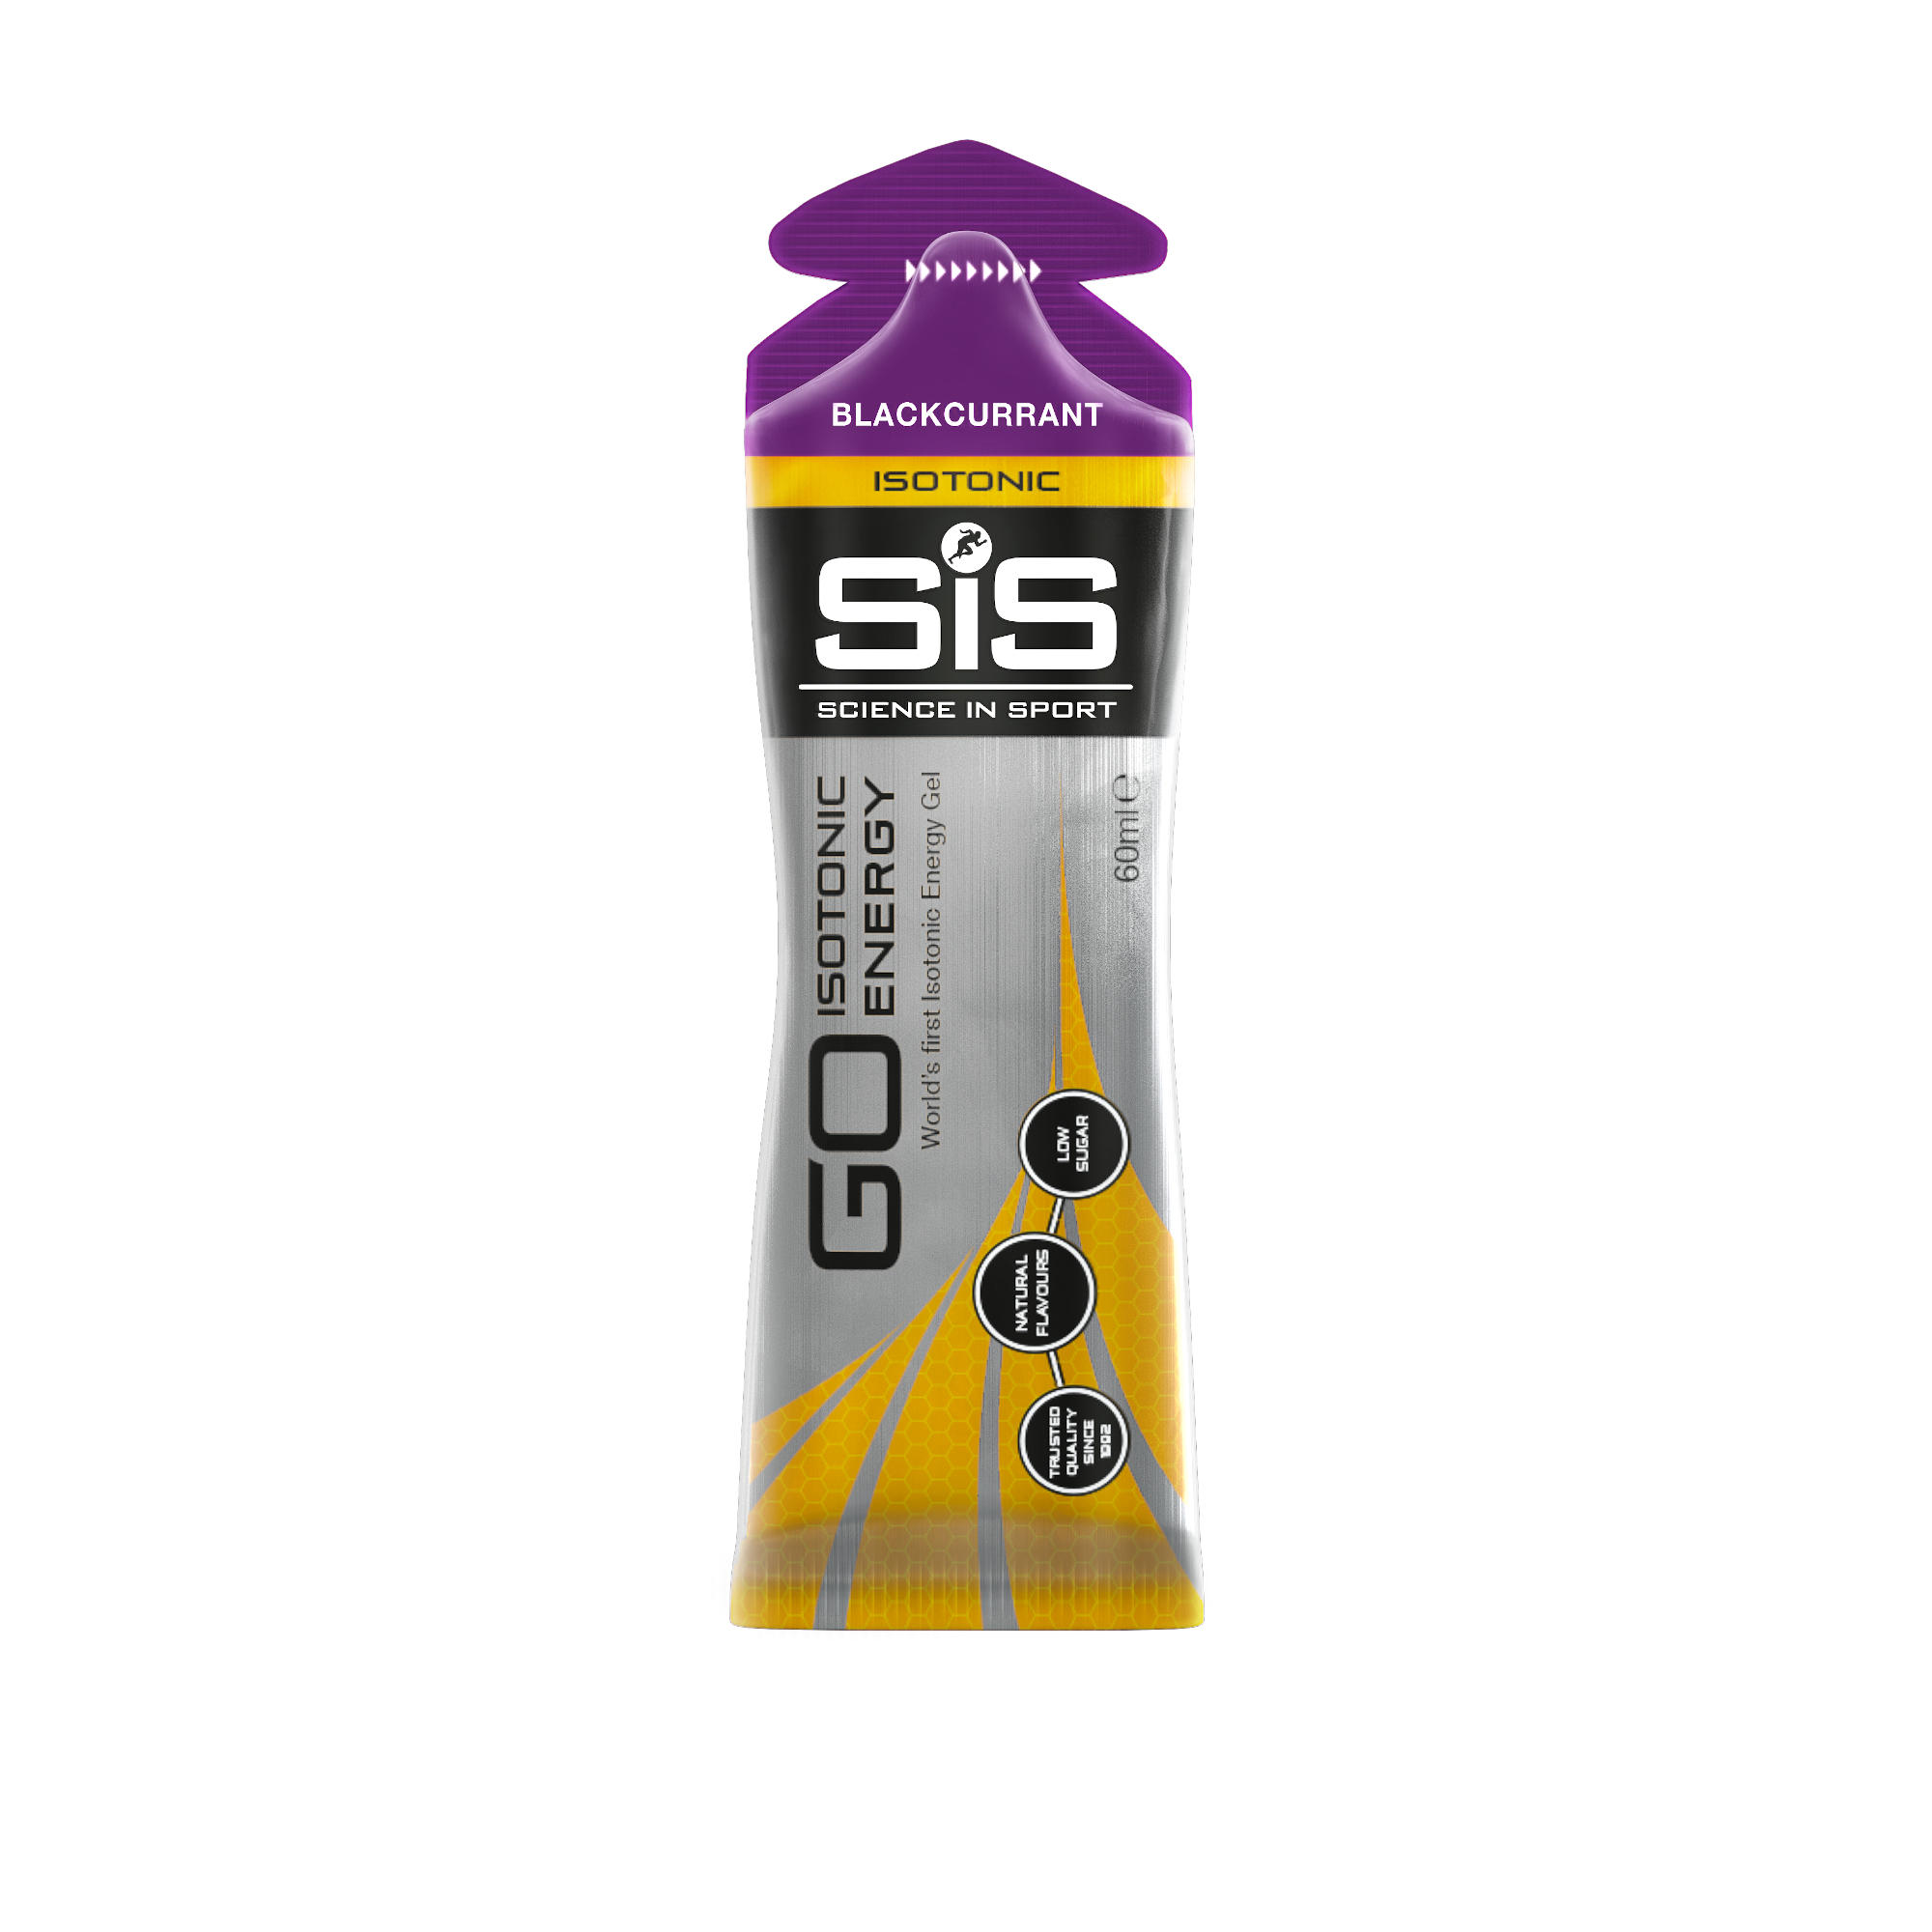 SCIENCE IN SPORT Go Isotonic Energy Gel Blackcurrant